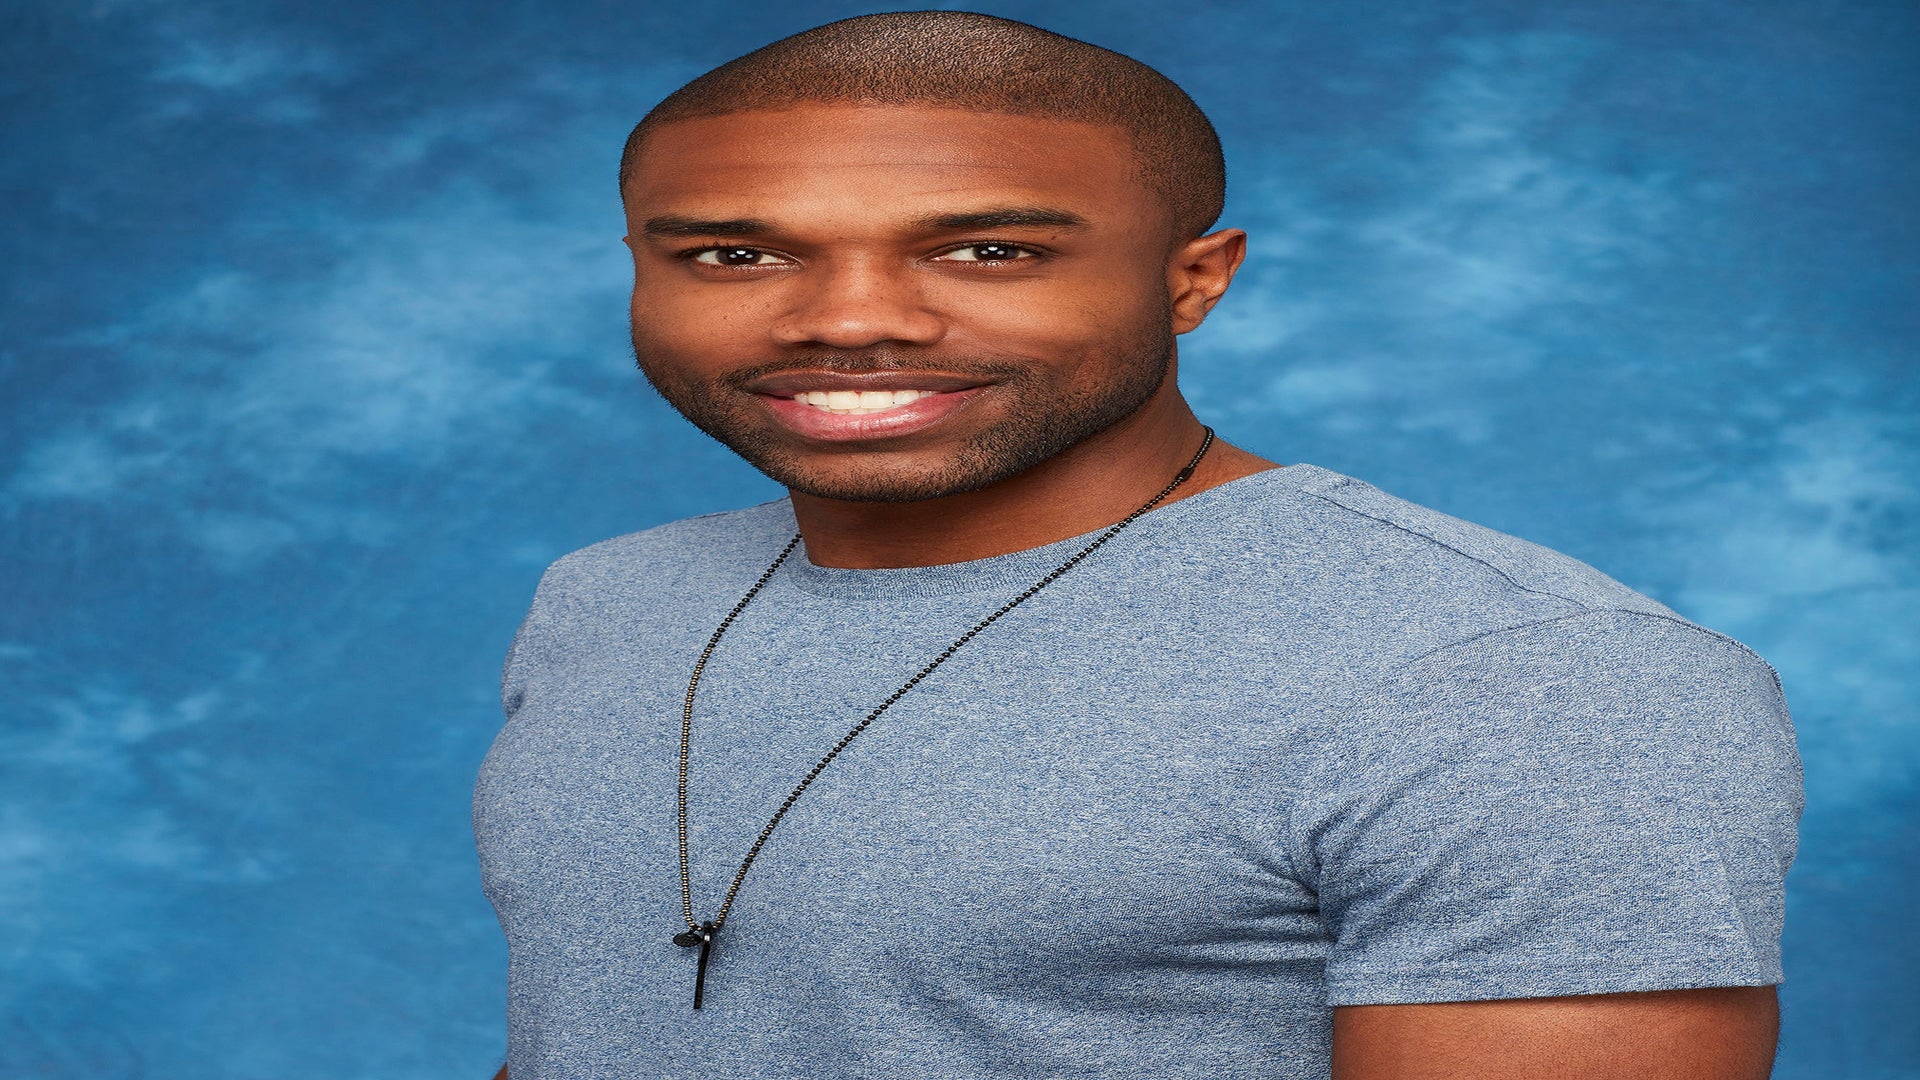 Demario Jackson From Bachelor In Paradise Allegedly Filmed In Sexual Encounter Halting